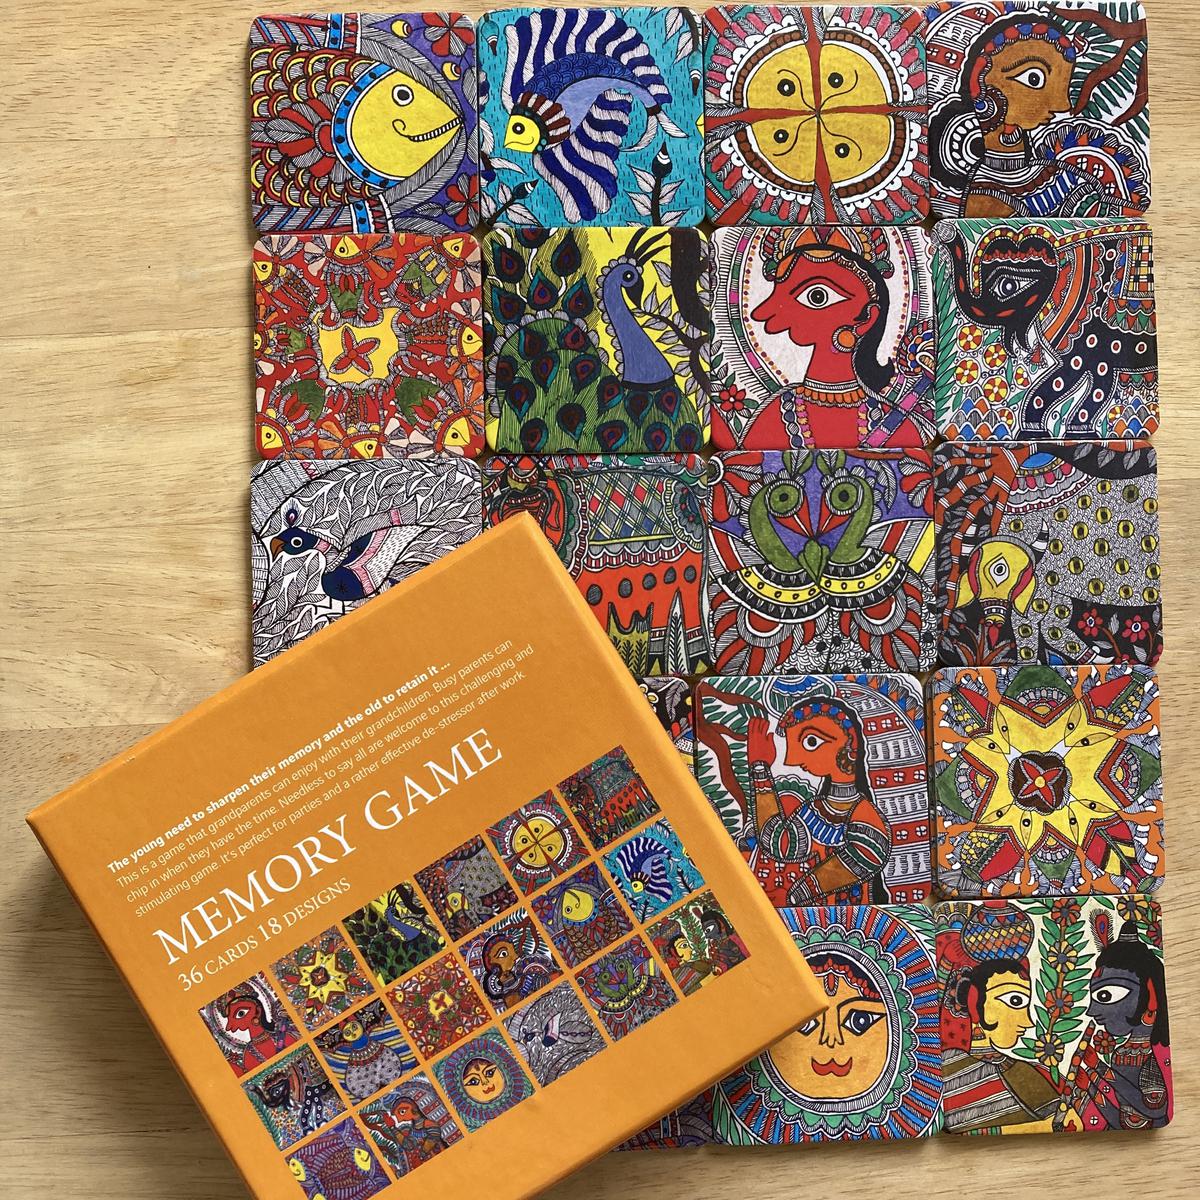 Memory game based on Indian art 